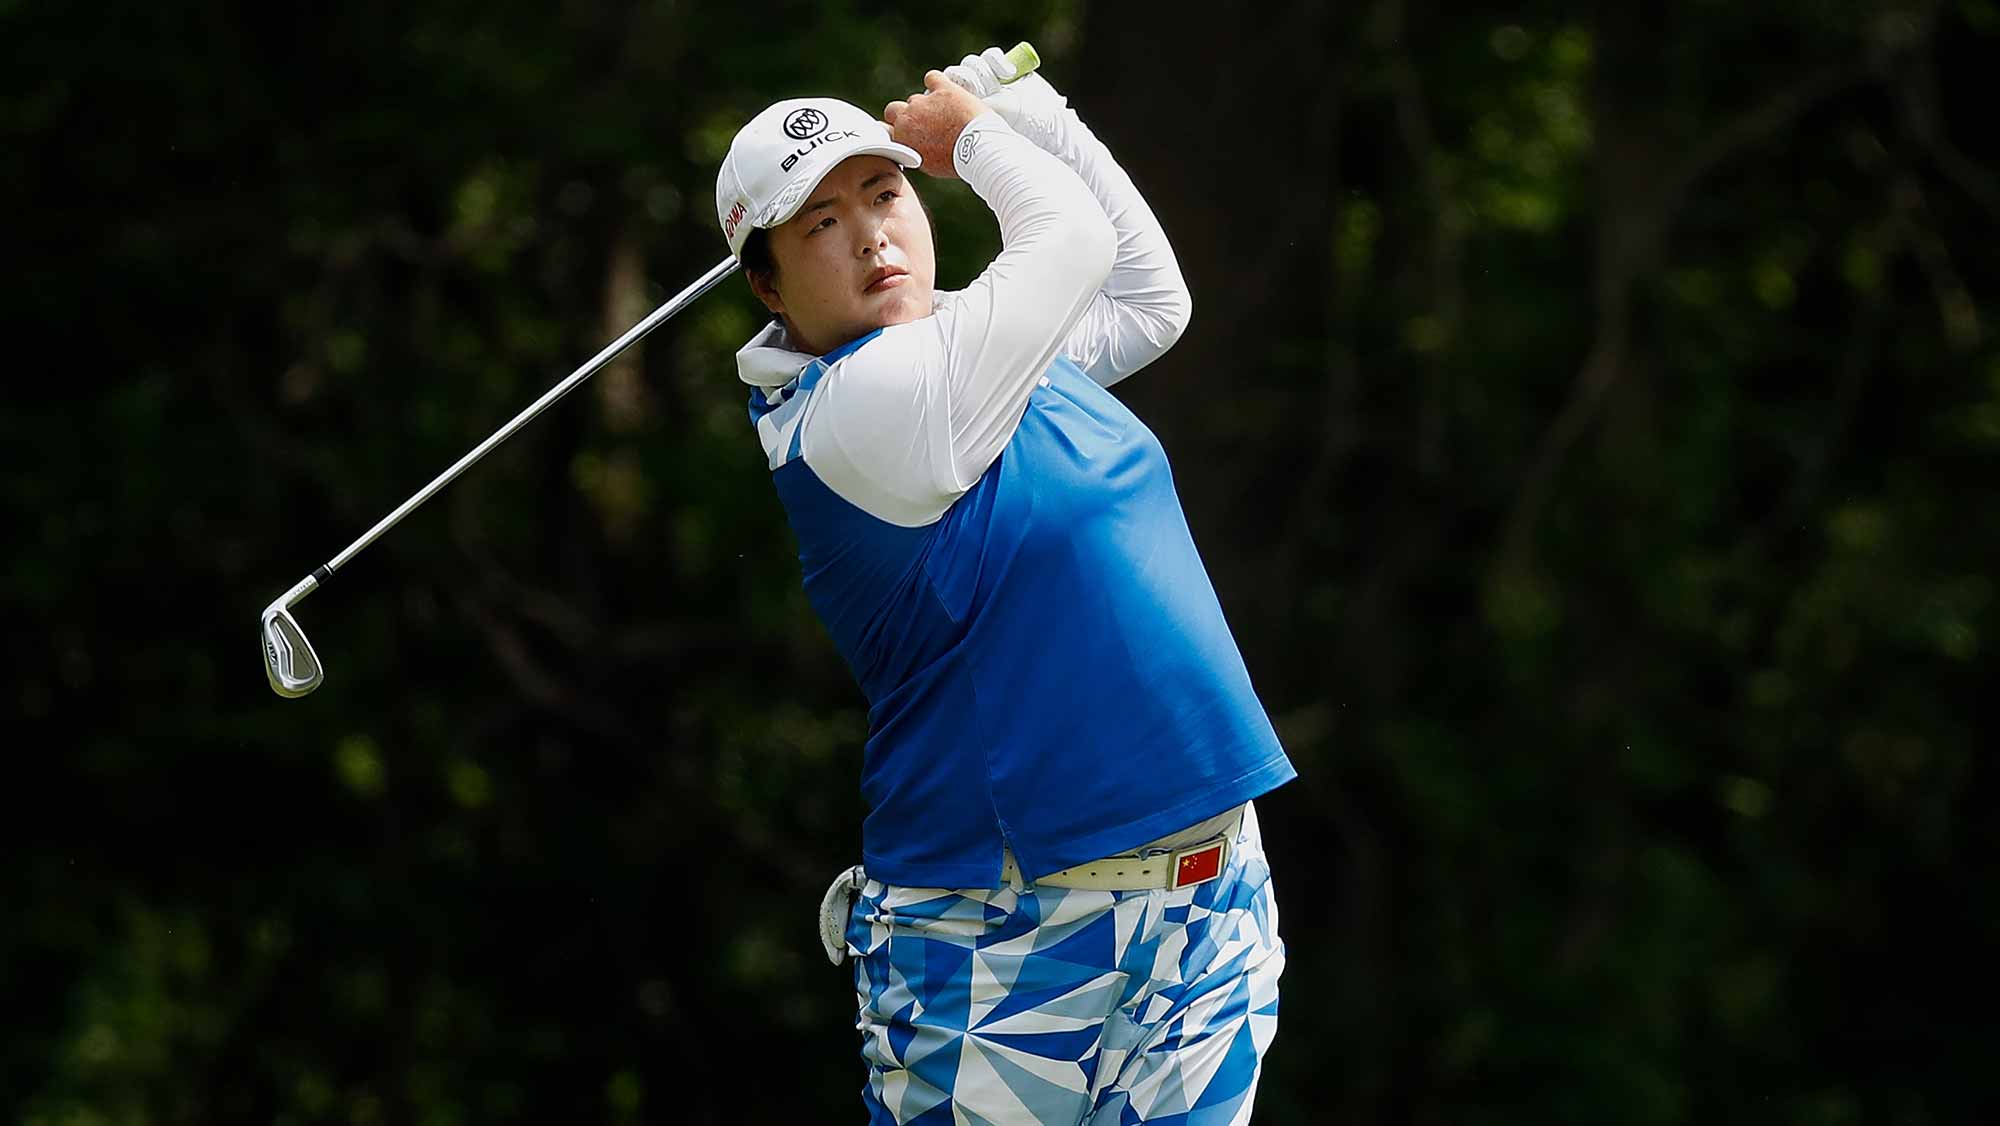 Shanshan Feng of China hits her second shot on the eighth hole during the final round of the LPGA Volvik Championship on May 28, 2017 at Travis Pointe Country Club Ann Arbor, Michigan